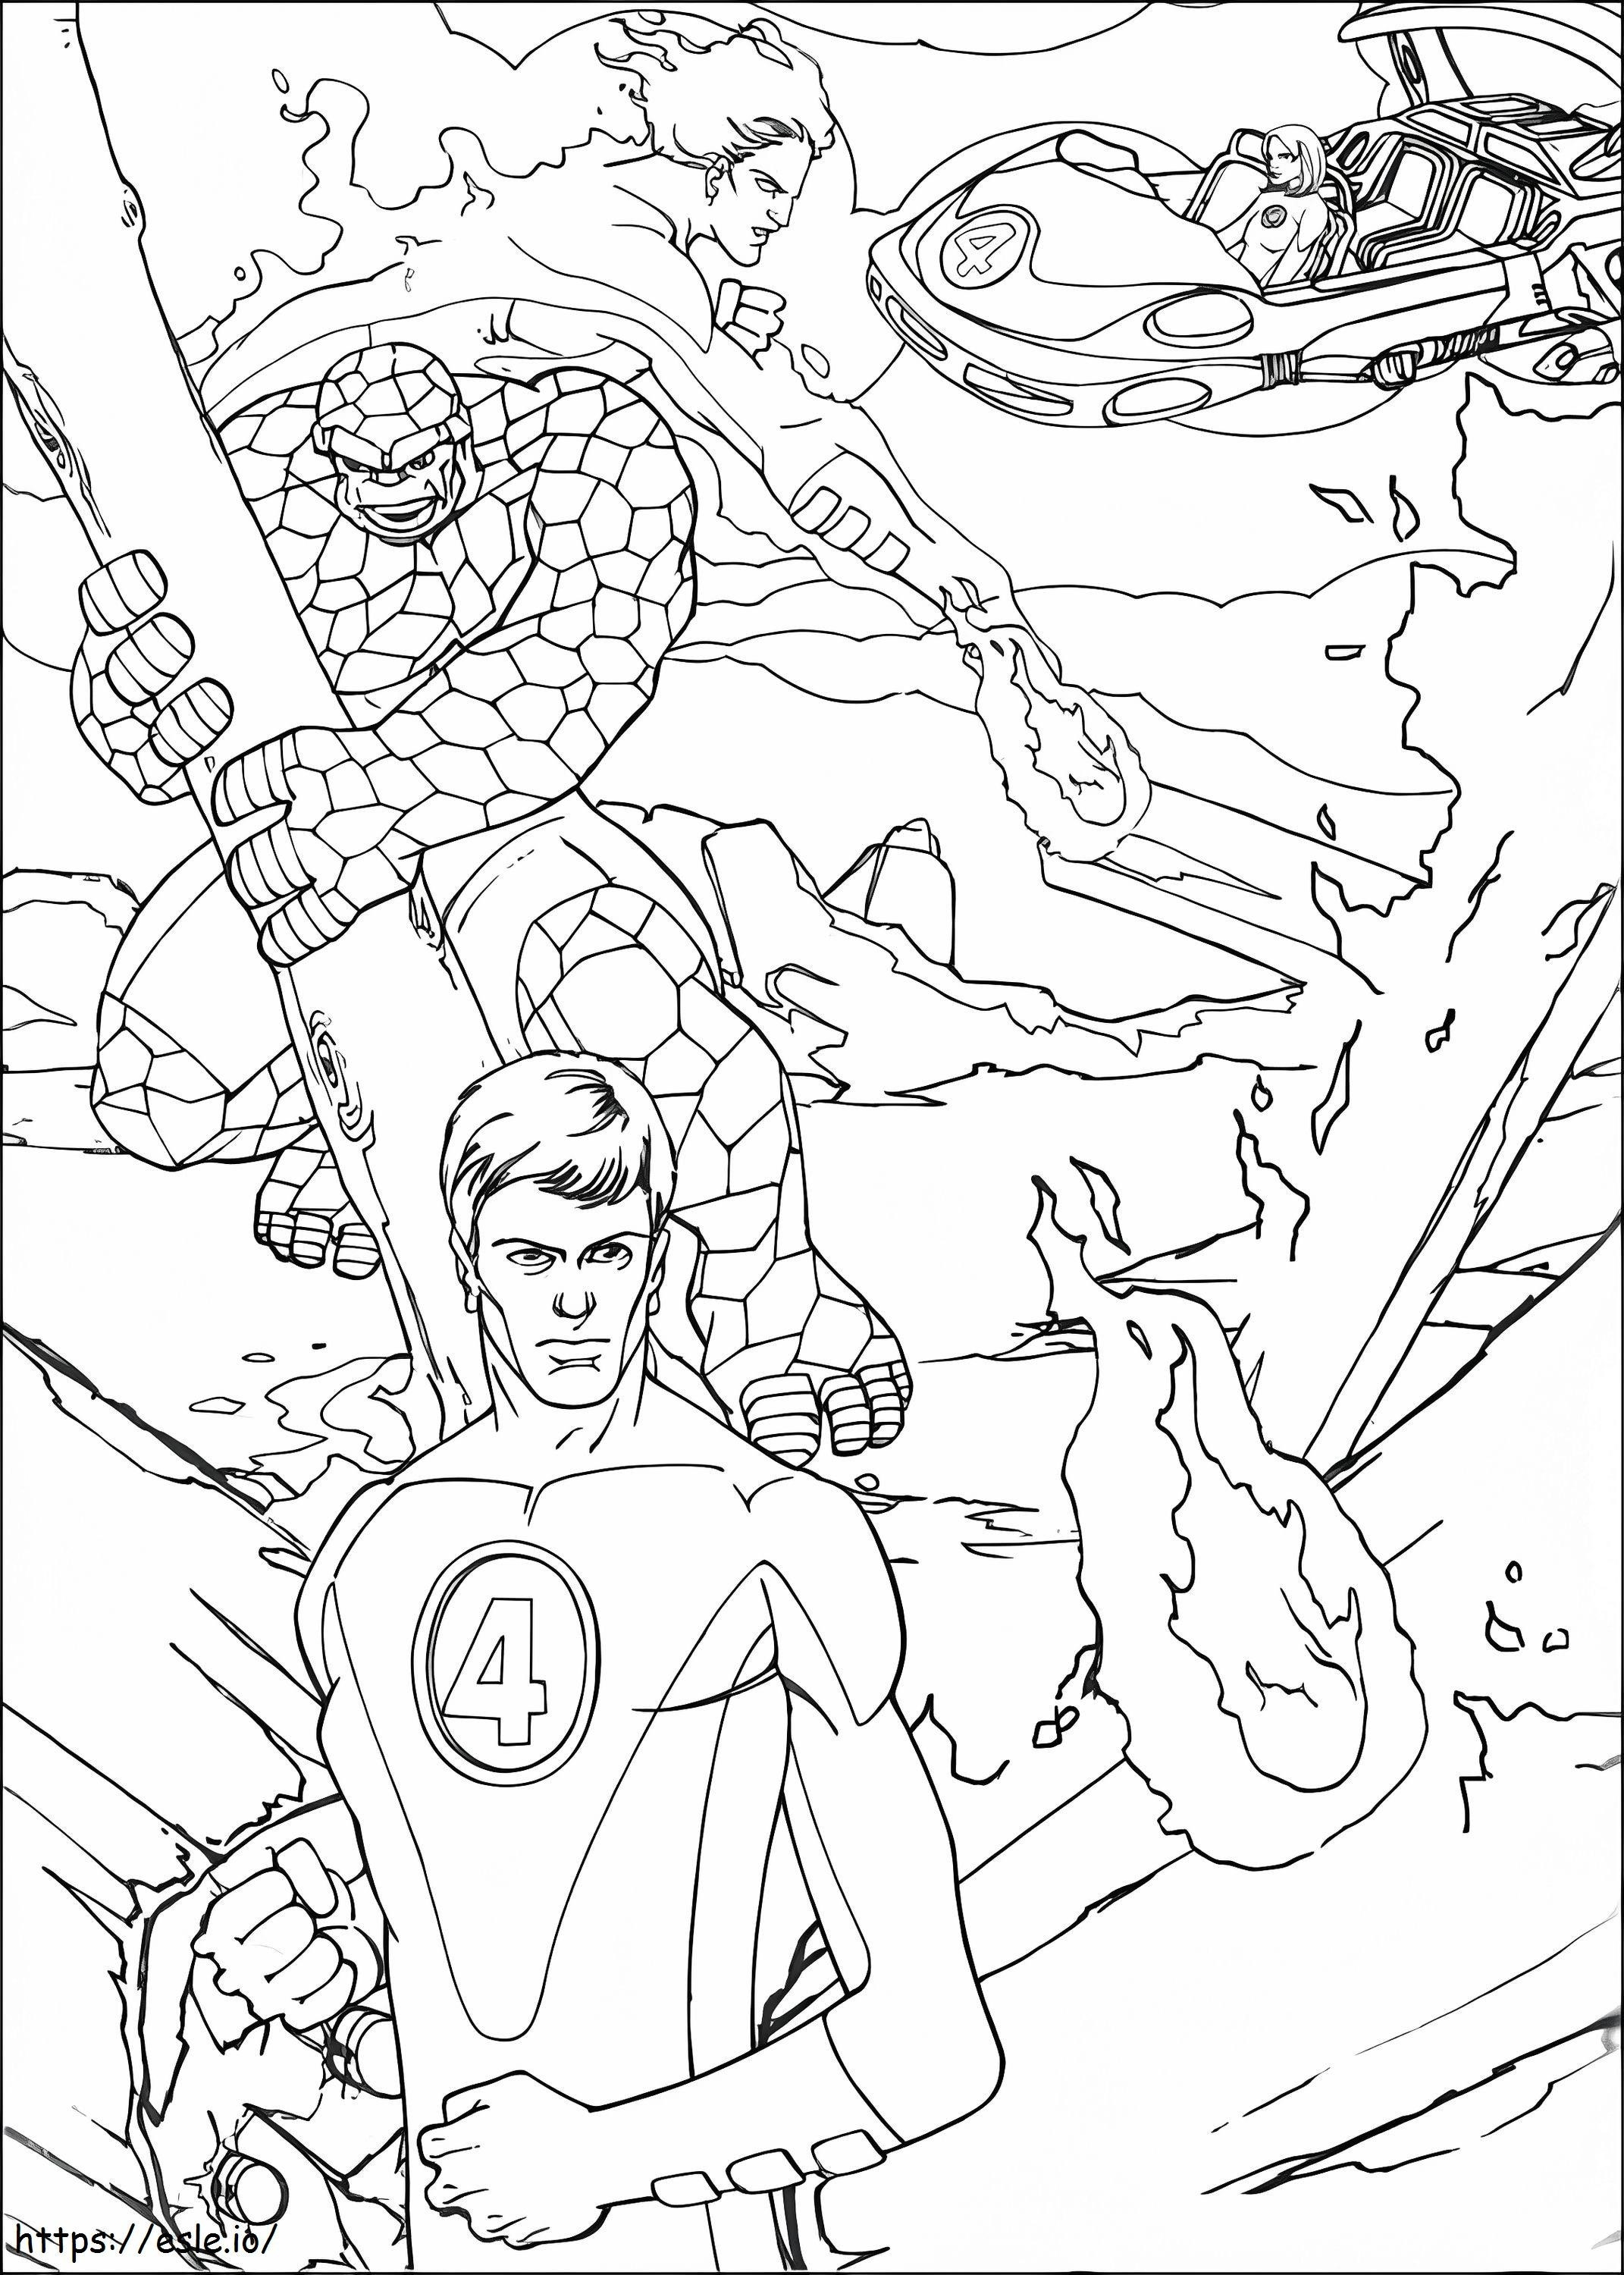 Fantastic Four 6 coloring page